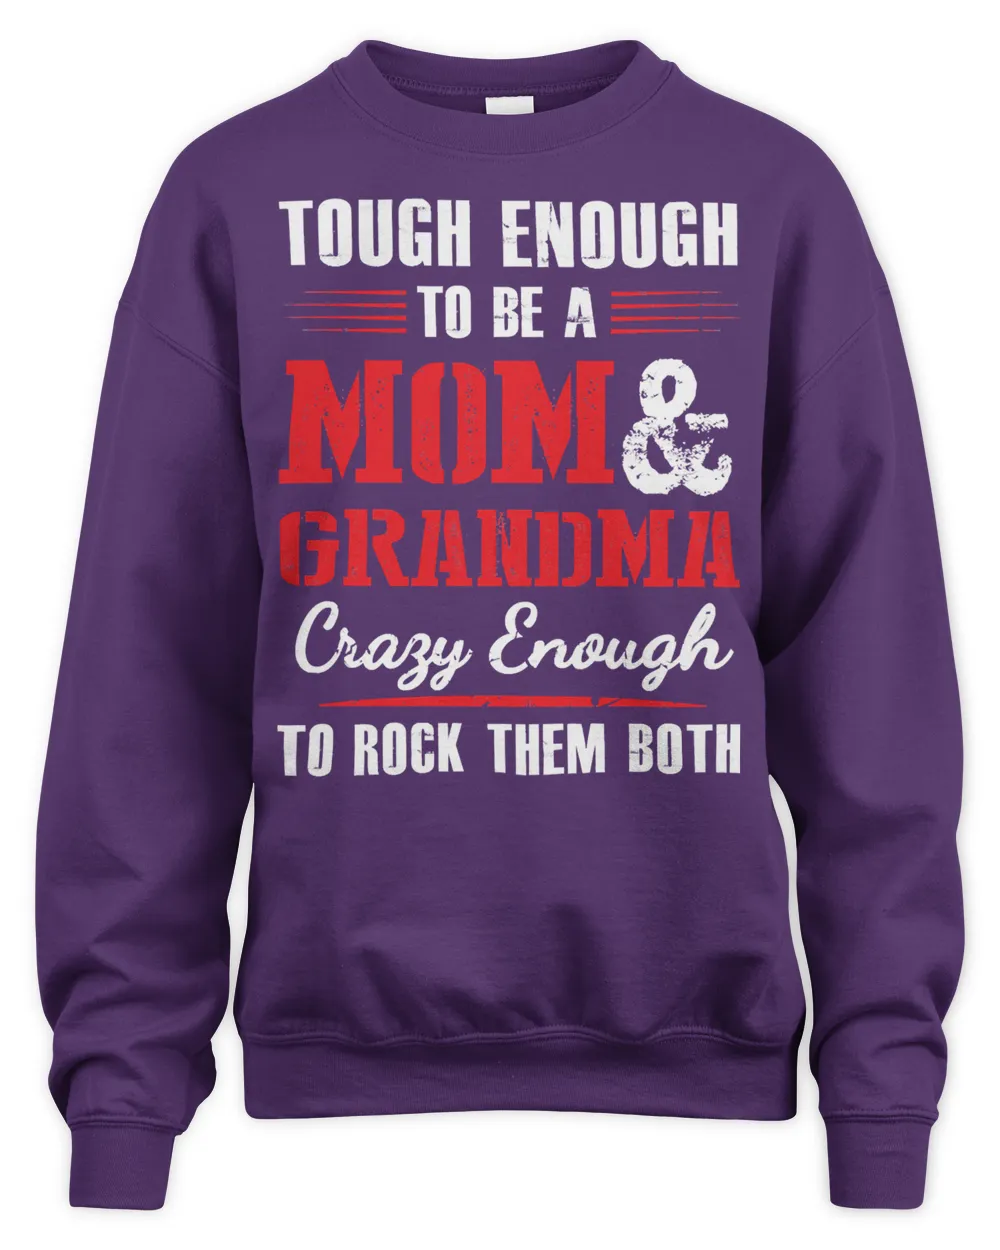 Mother Grandma tough enough to be a mom and grandma crazy enough 420 Mom Grandmother